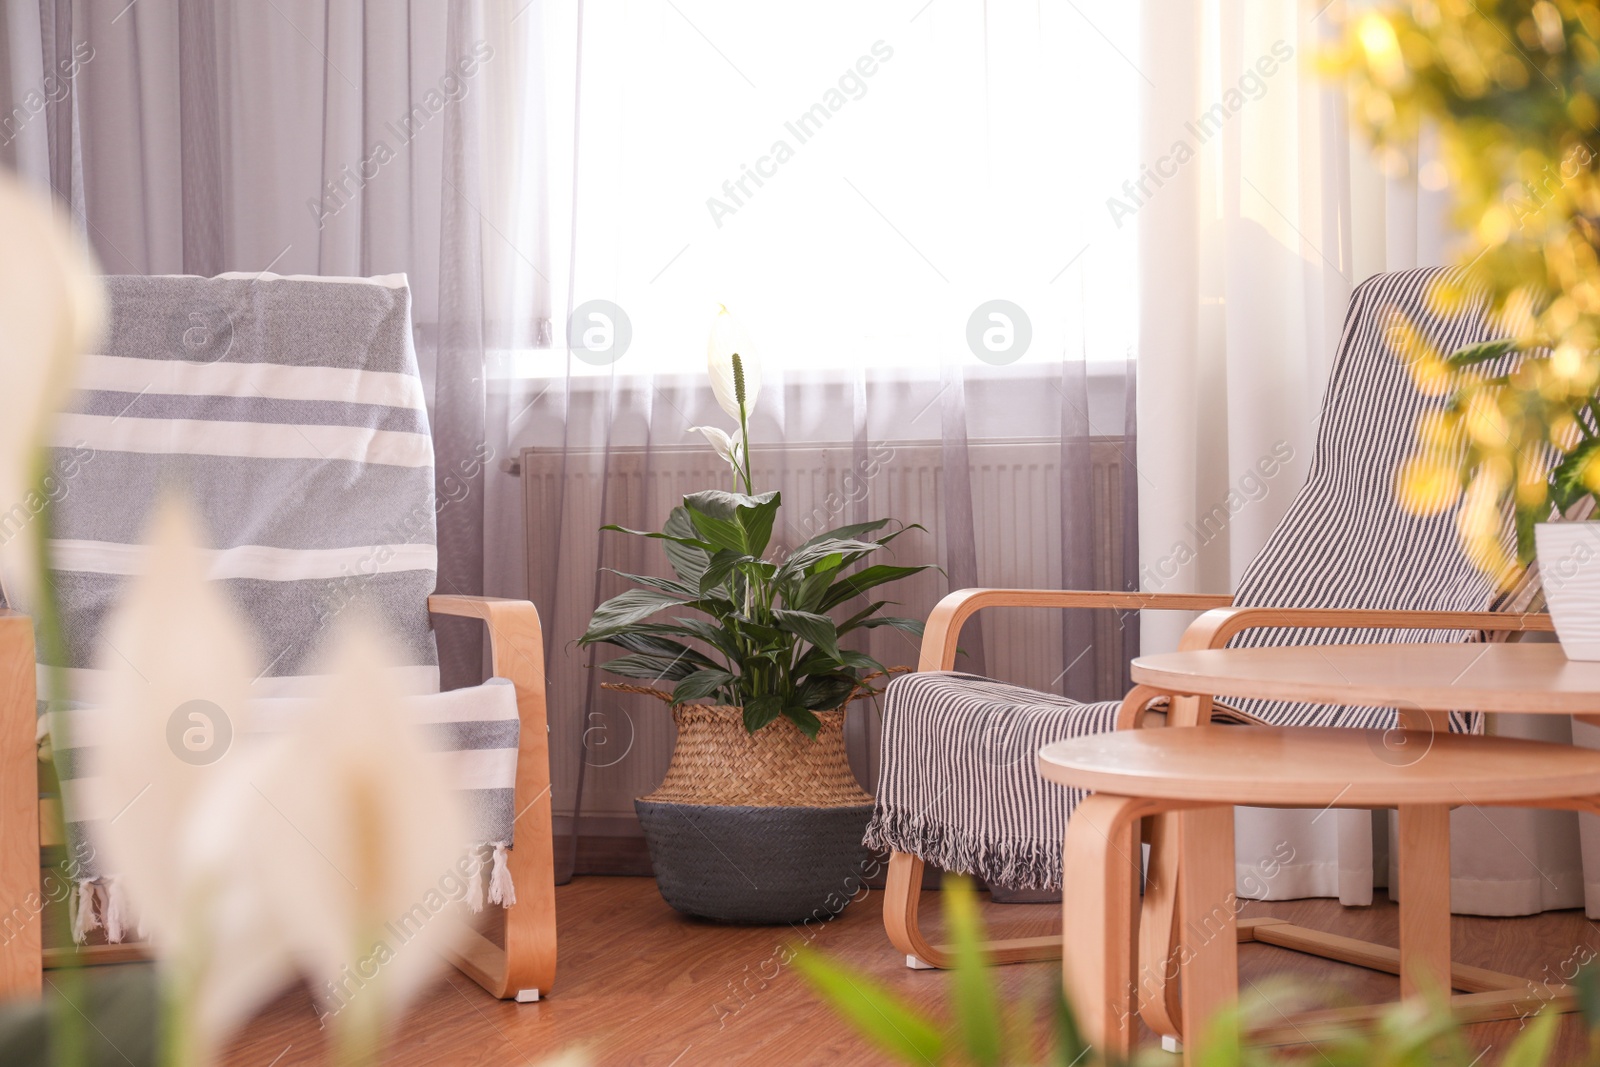 Photo of Beautiful potted plants in stylish room interior. Design elements